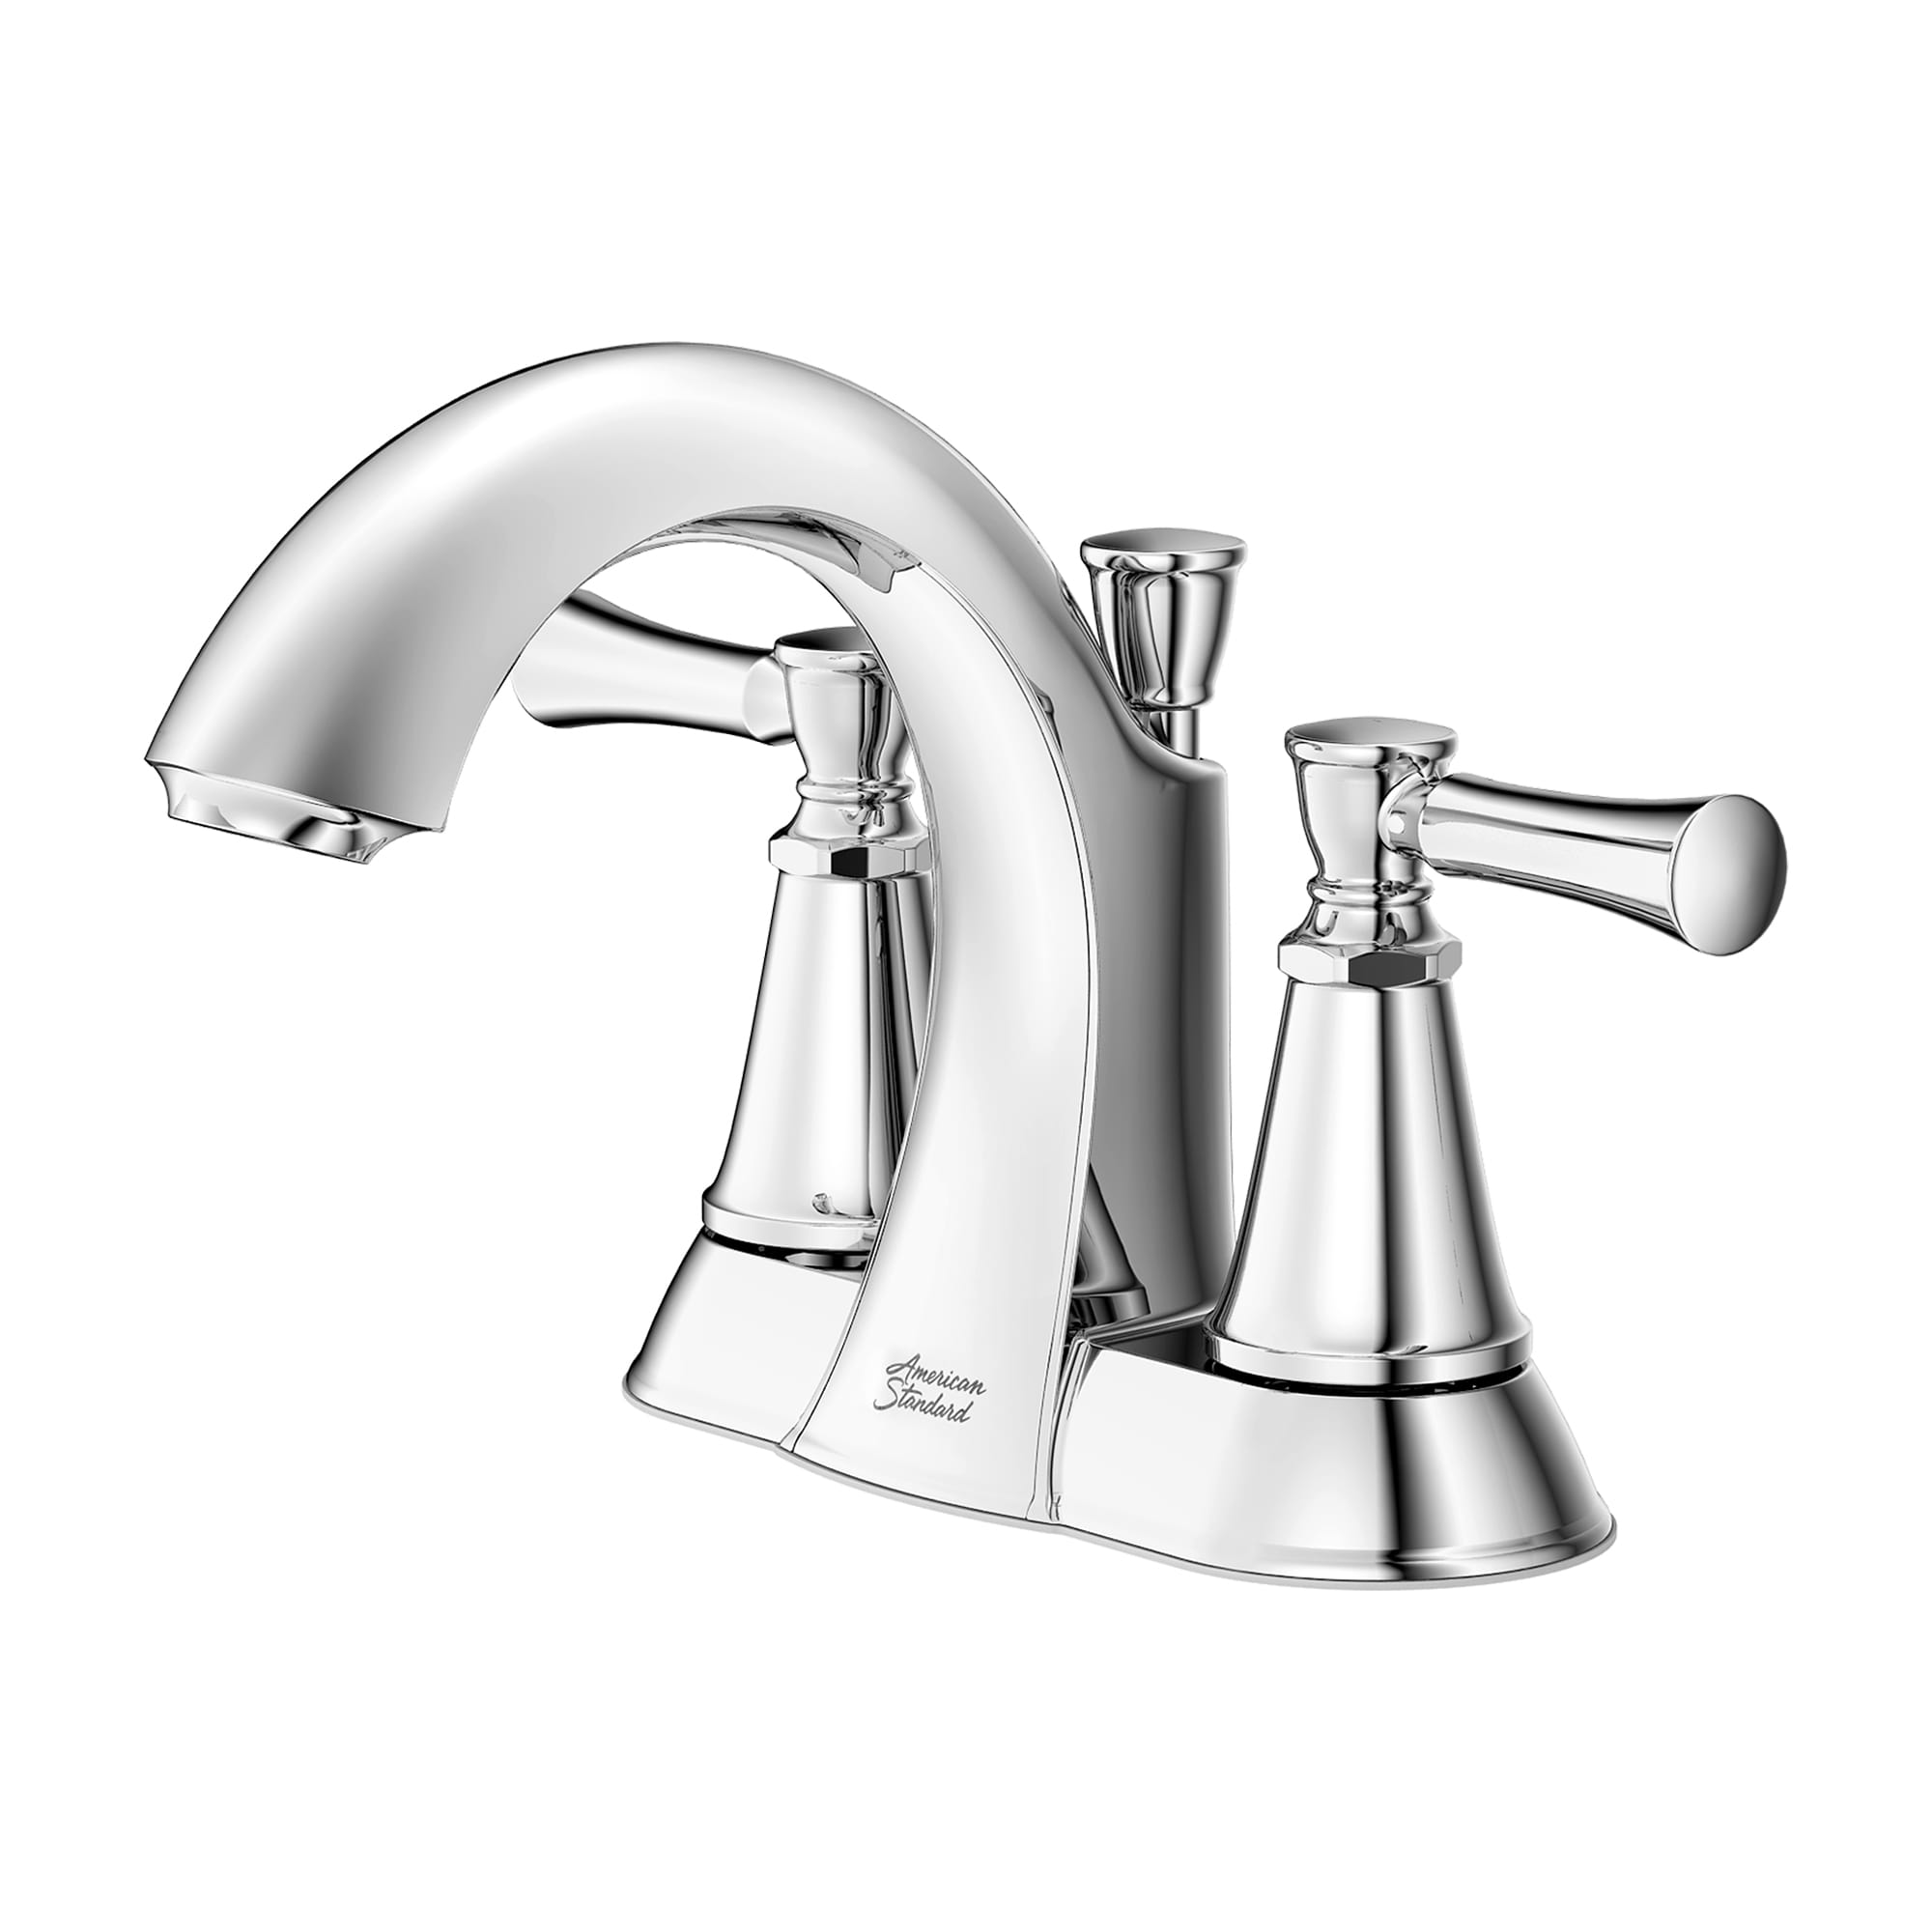 Chancellor 4 In Centerset 2 Handle Bathroom Faucet 12 GPM with Lever Handles CHROME